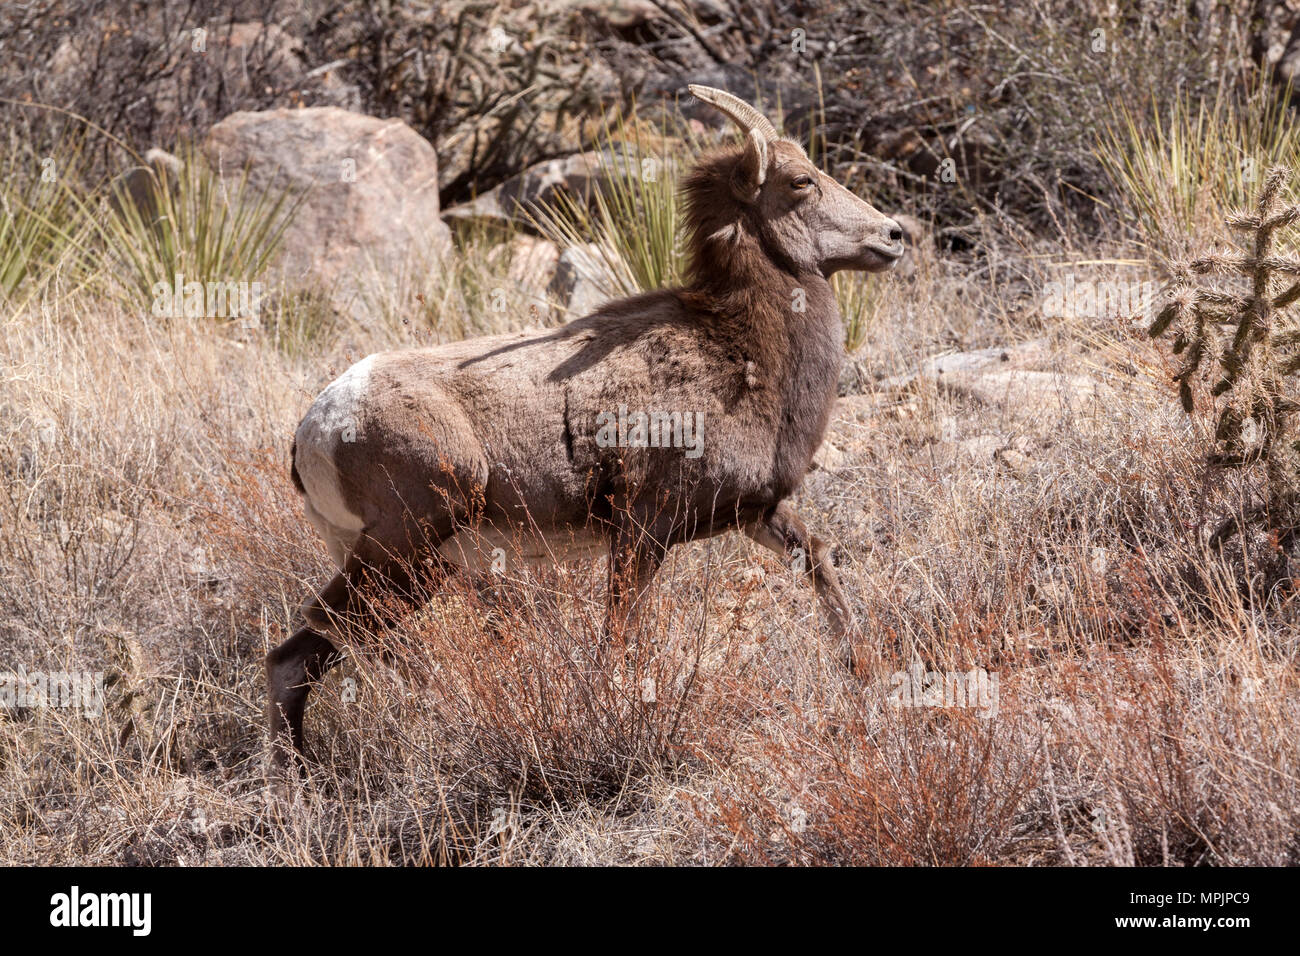 A desert bighorn sheep (Ovis canadensis ssp. nelsoni) moves up a dry, barren hillside in habitat for which it is uniquely adapted Stock Photo